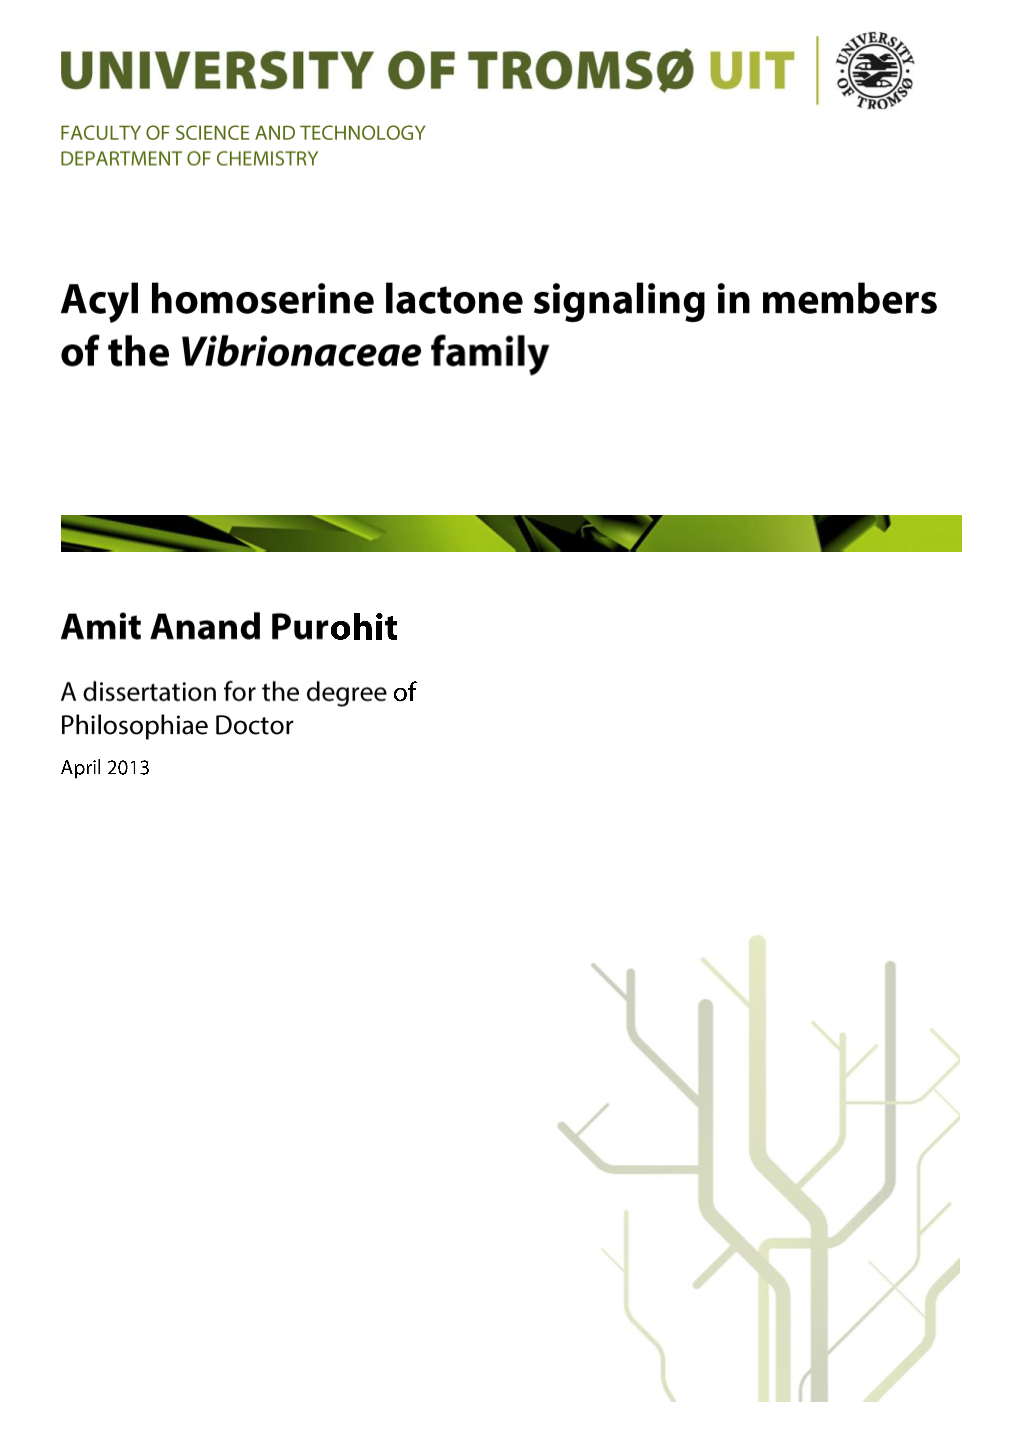 Acyl Homoserine Lactone Signaling in Members of the Vibrionaceae Family